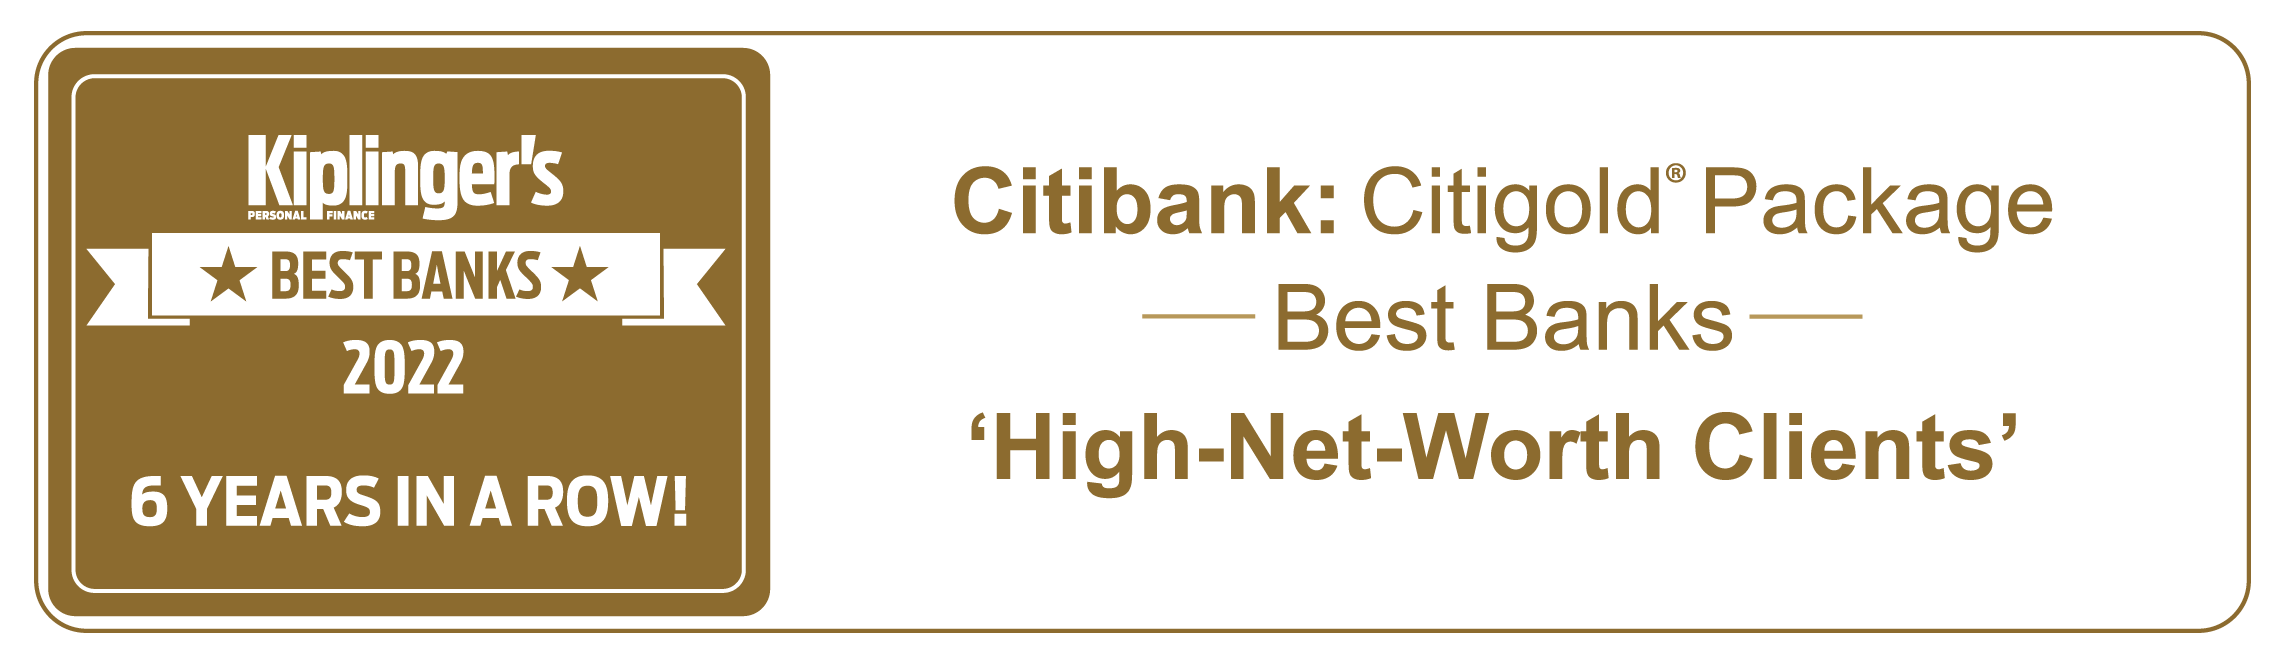 Kiplinger's Best Banks 2021, 6 years in a row! Citibank: Citigold Package Best High Net Worth Families Bank